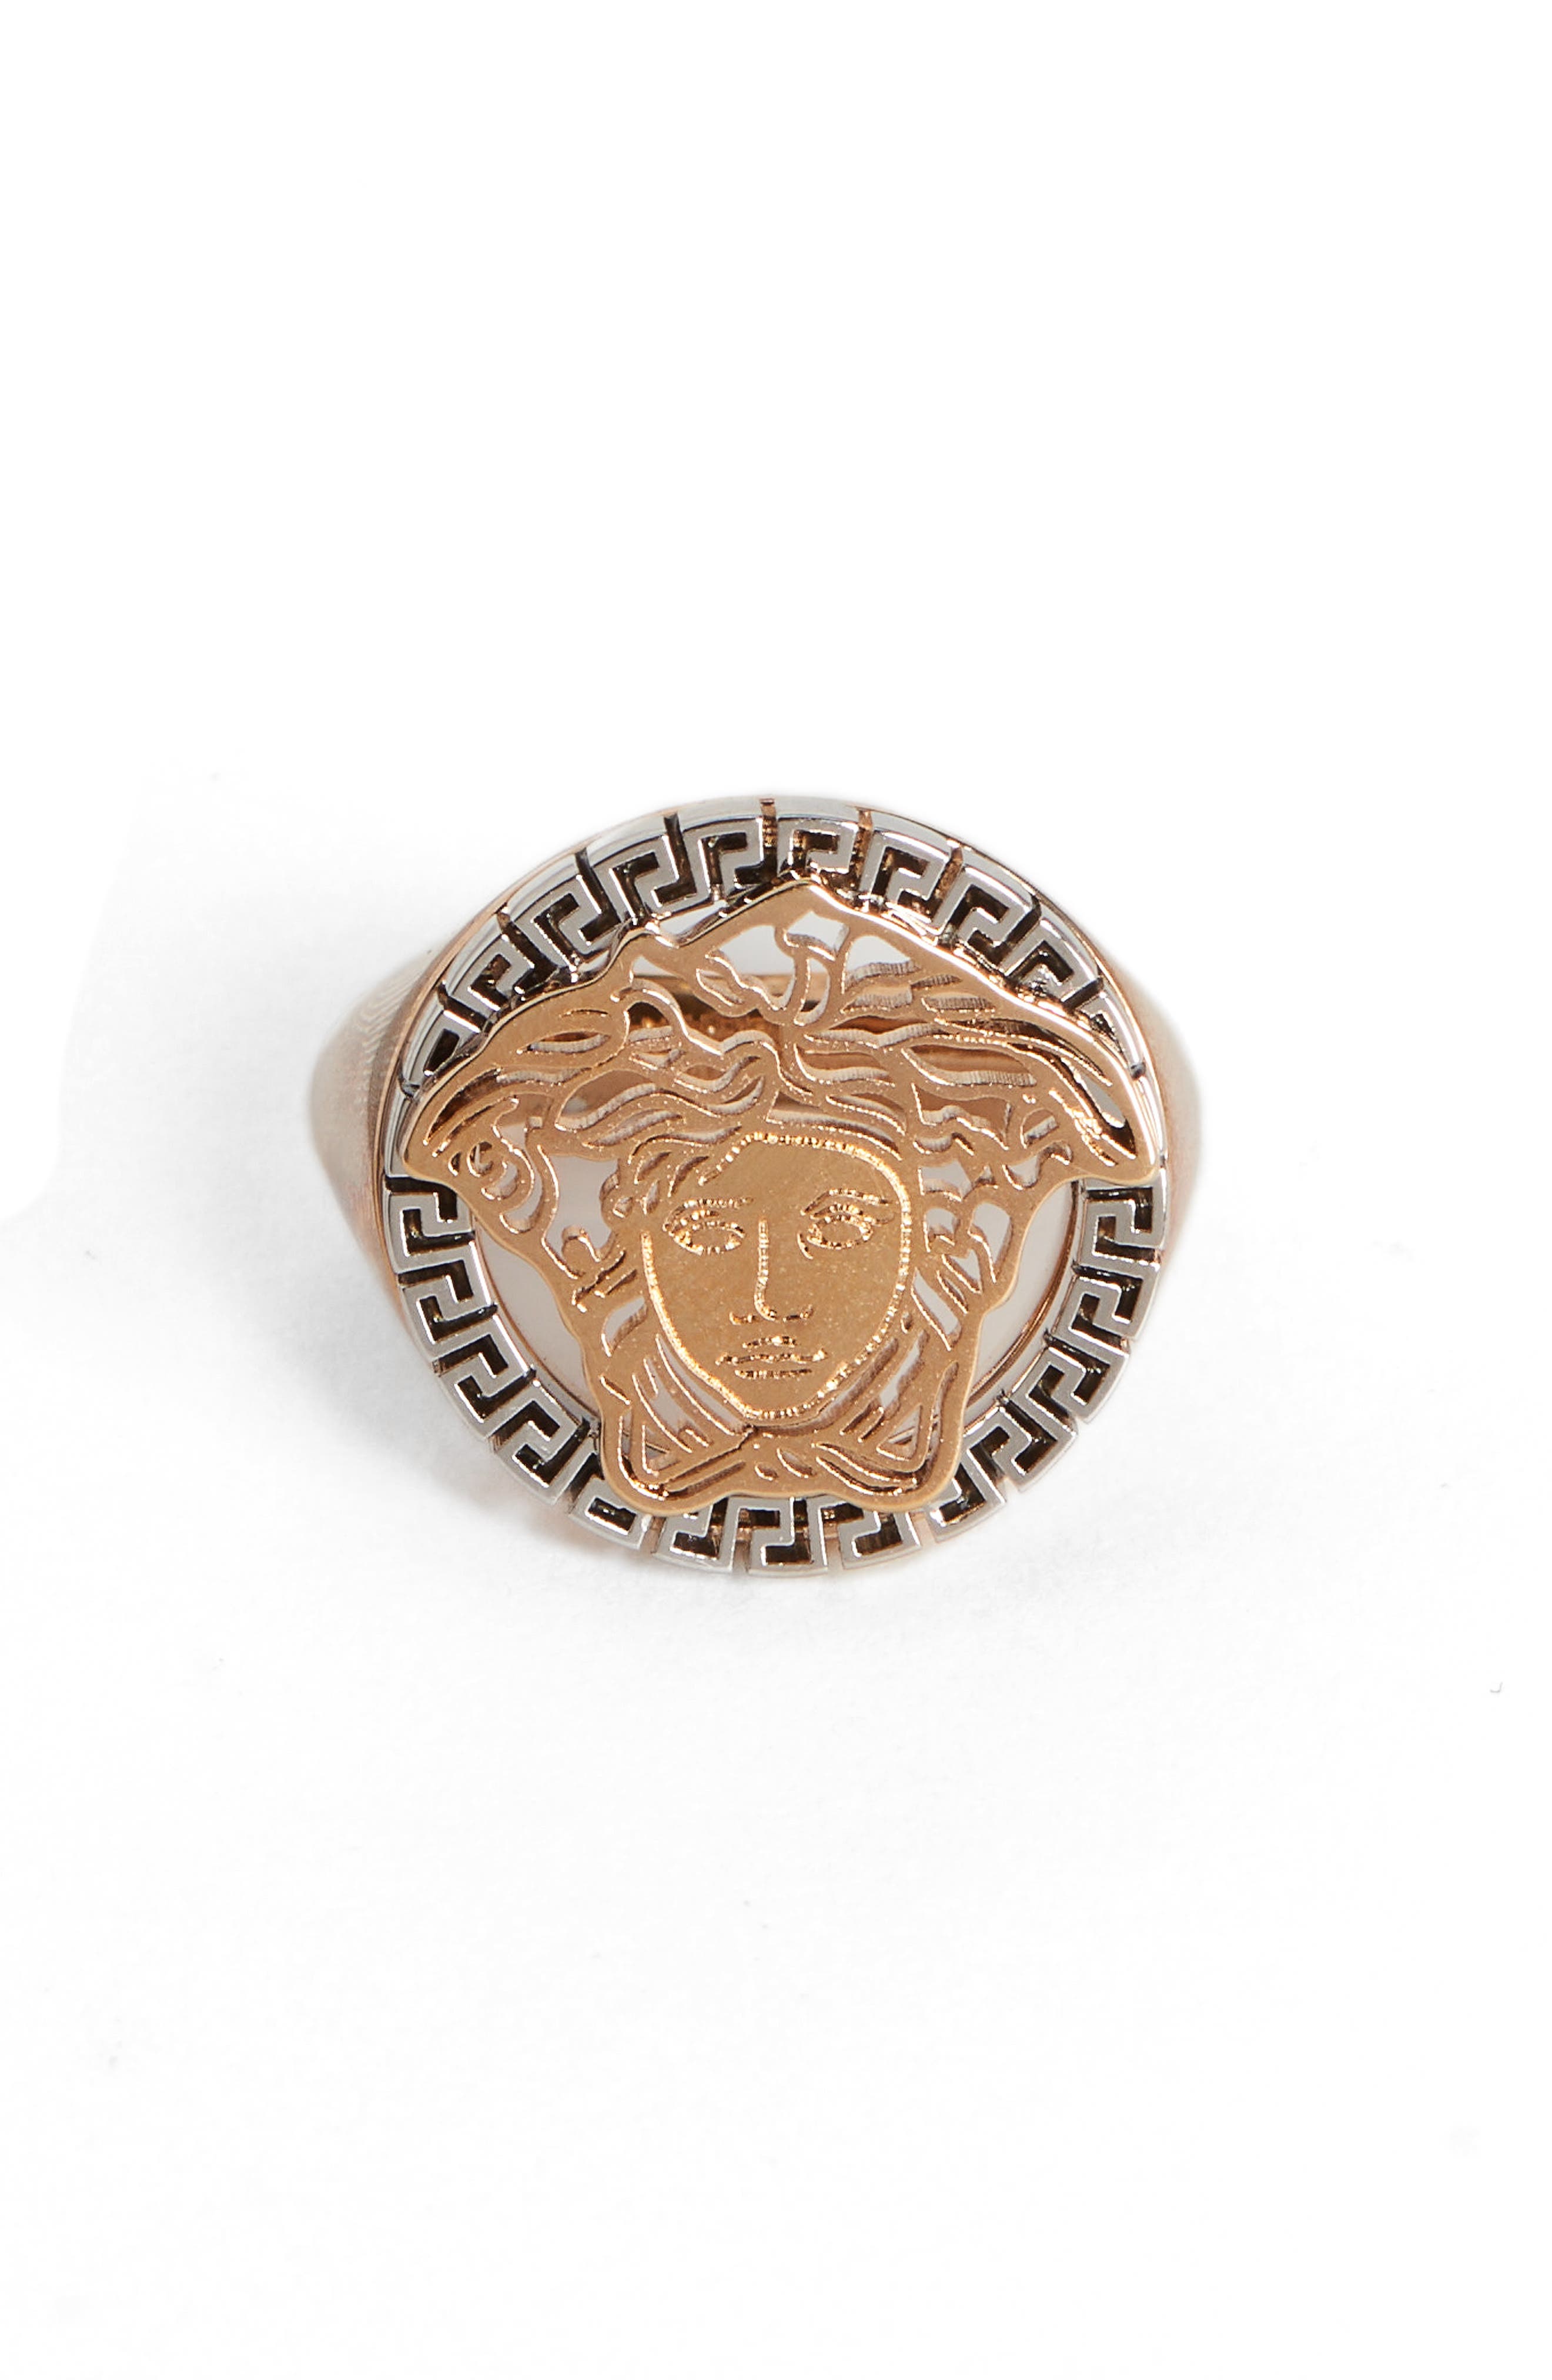 Versace Men's Medusa Ring in Gold/Silver at Nordstrom, Size 10 Us